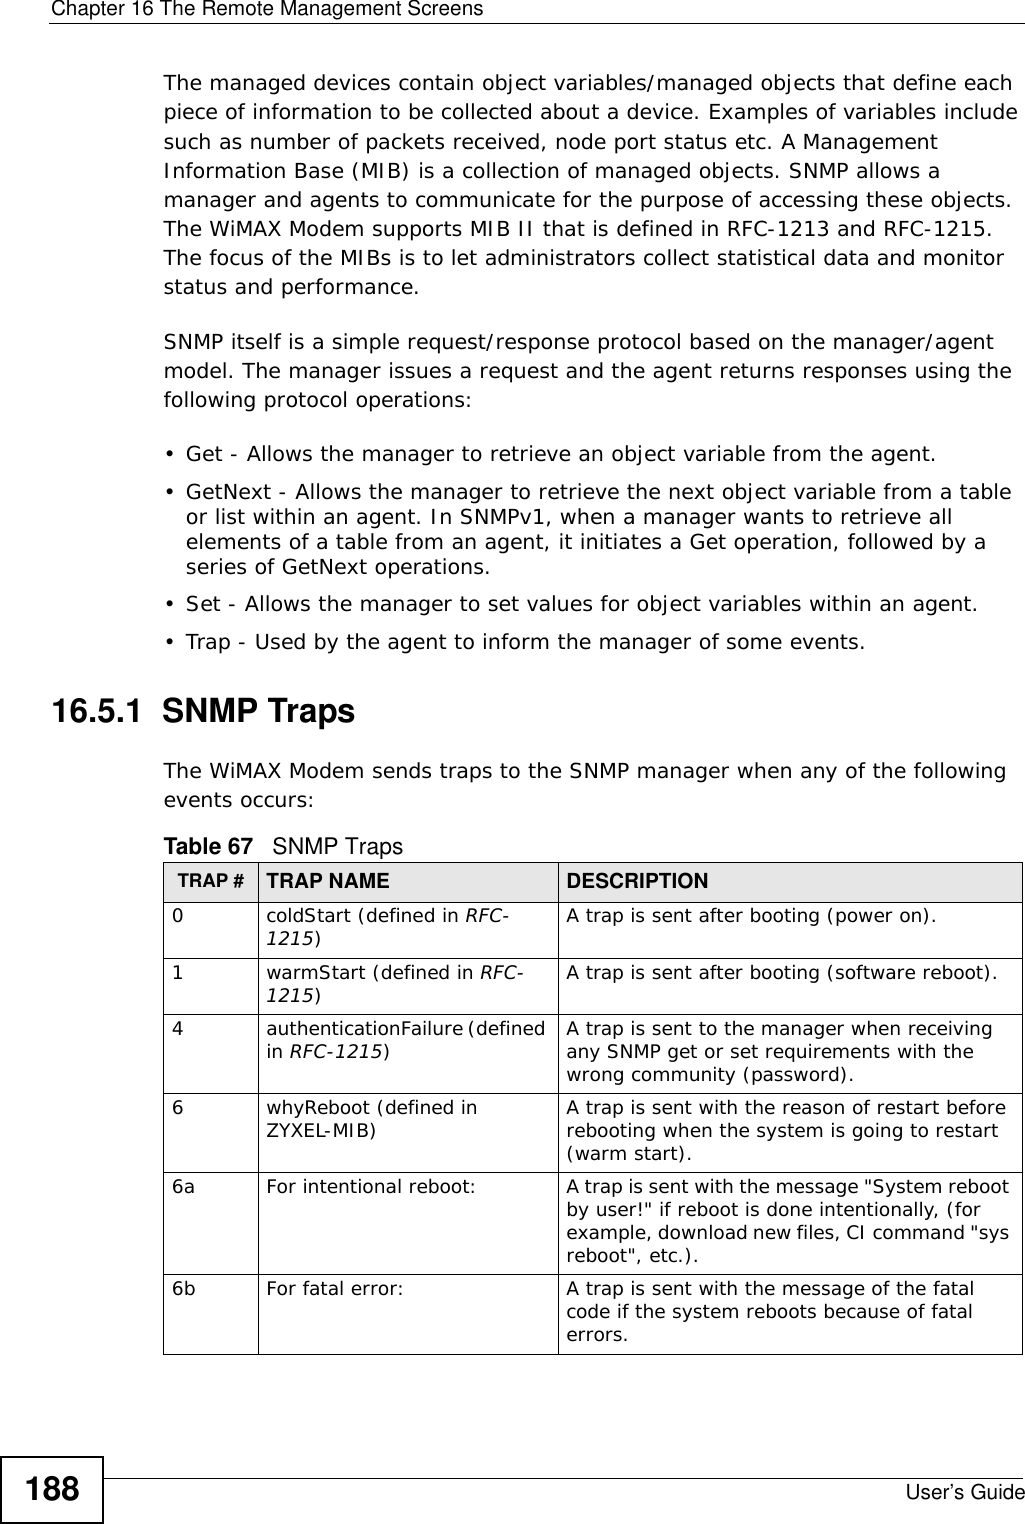 Chapter 16 The Remote Management ScreensUser’s Guide188The managed devices contain object variables/managed objects that define each piece of information to be collected about a device. Examples of variables include such as number of packets received, node port status etc. A Management Information Base (MIB) is a collection of managed objects. SNMP allows a manager and agents to communicate for the purpose of accessing these objects. The WiMAX Modem supports MIB II that is defined in RFC-1213 and RFC-1215. The focus of the MIBs is to let administrators collect statistical data and monitor status and performance.SNMP itself is a simple request/response protocol based on the manager/agent model. The manager issues a request and the agent returns responses using the following protocol operations: • Get - Allows the manager to retrieve an object variable from the agent. • GetNext - Allows the manager to retrieve the next object variable from a table or list within an agent. In SNMPv1, when a manager wants to retrieve all elements of a table from an agent, it initiates a Get operation, followed by a series of GetNext operations. • Set - Allows the manager to set values for object variables within an agent. • Trap - Used by the agent to inform the manager of some events.16.5.1  SNMP TrapsThe WiMAX Modem sends traps to the SNMP manager when any of the following events occurs:          Table 67   SNMP TrapsTRAP # TRAP NAME DESCRIPTION0coldStart (defined in RFC-1215)A trap is sent after booting (power on).1warmStart (defined in RFC-1215)A trap is sent after booting (software reboot).4authenticationFailure (defined in RFC-1215)A trap is sent to the manager when receiving any SNMP get or set requirements with the wrong community (password).6whyReboot (defined in ZYXEL-MIB) A trap is sent with the reason of restart before rebooting when the system is going to restart (warm start).6a For intentional reboot: A trap is sent with the message &quot;System reboot by user!&quot; if reboot is done intentionally, (for example, download new files, CI command &quot;sys reboot&quot;, etc.).6b For fatal error:  A trap is sent with the message of the fatal code if the system reboots because of fatal errors.